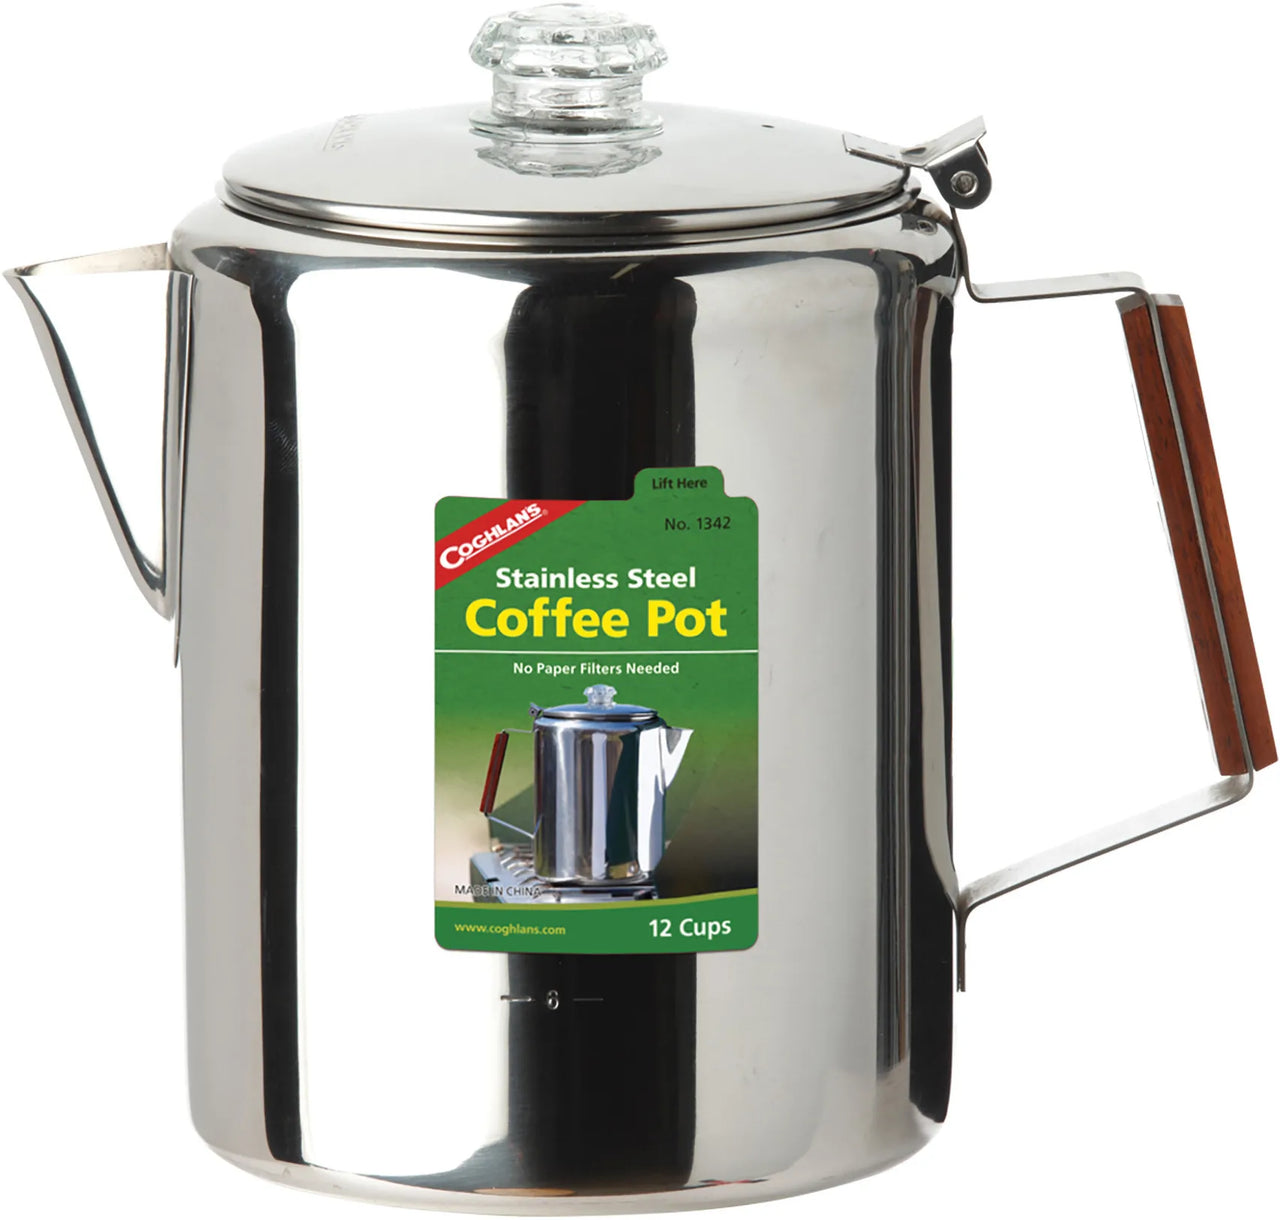 Stainless Steel Percolator - 12 Cups